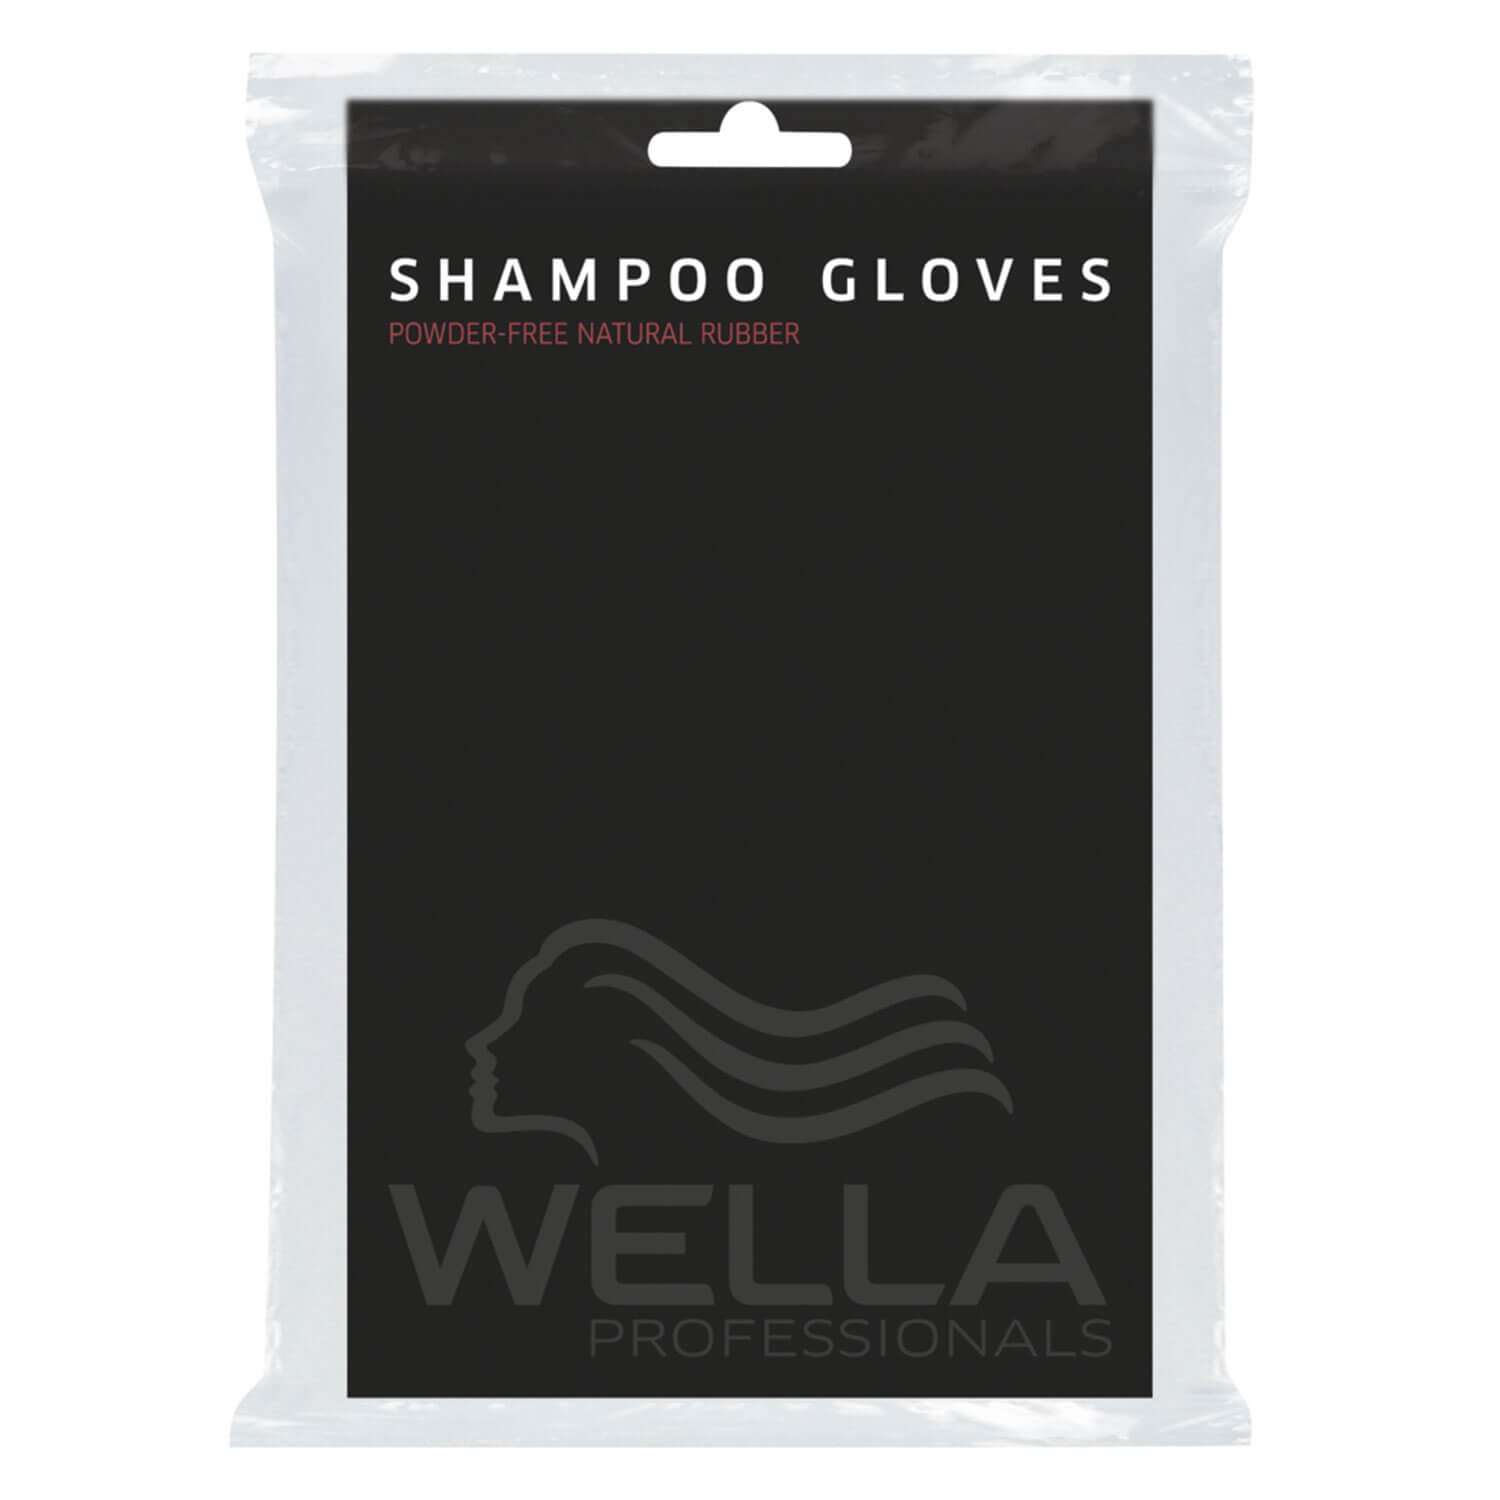 Product image from Wella Tools - Wiederverwendbare Waschhandschuhe